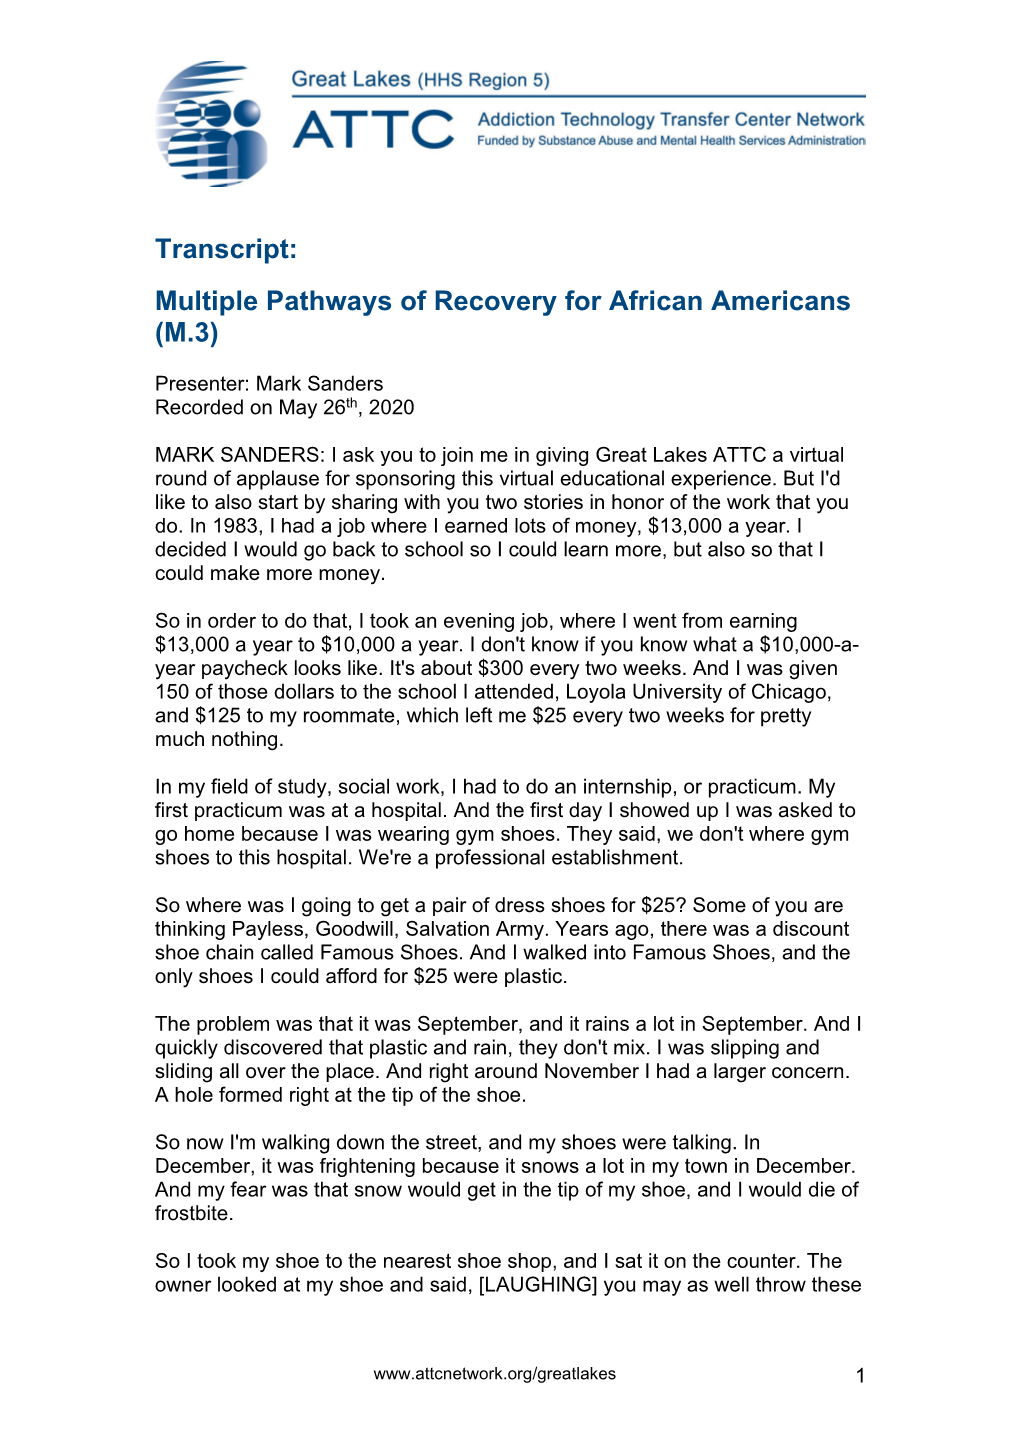 Transcript: Multiple Pathways of Recovery for African Americans (M.3)